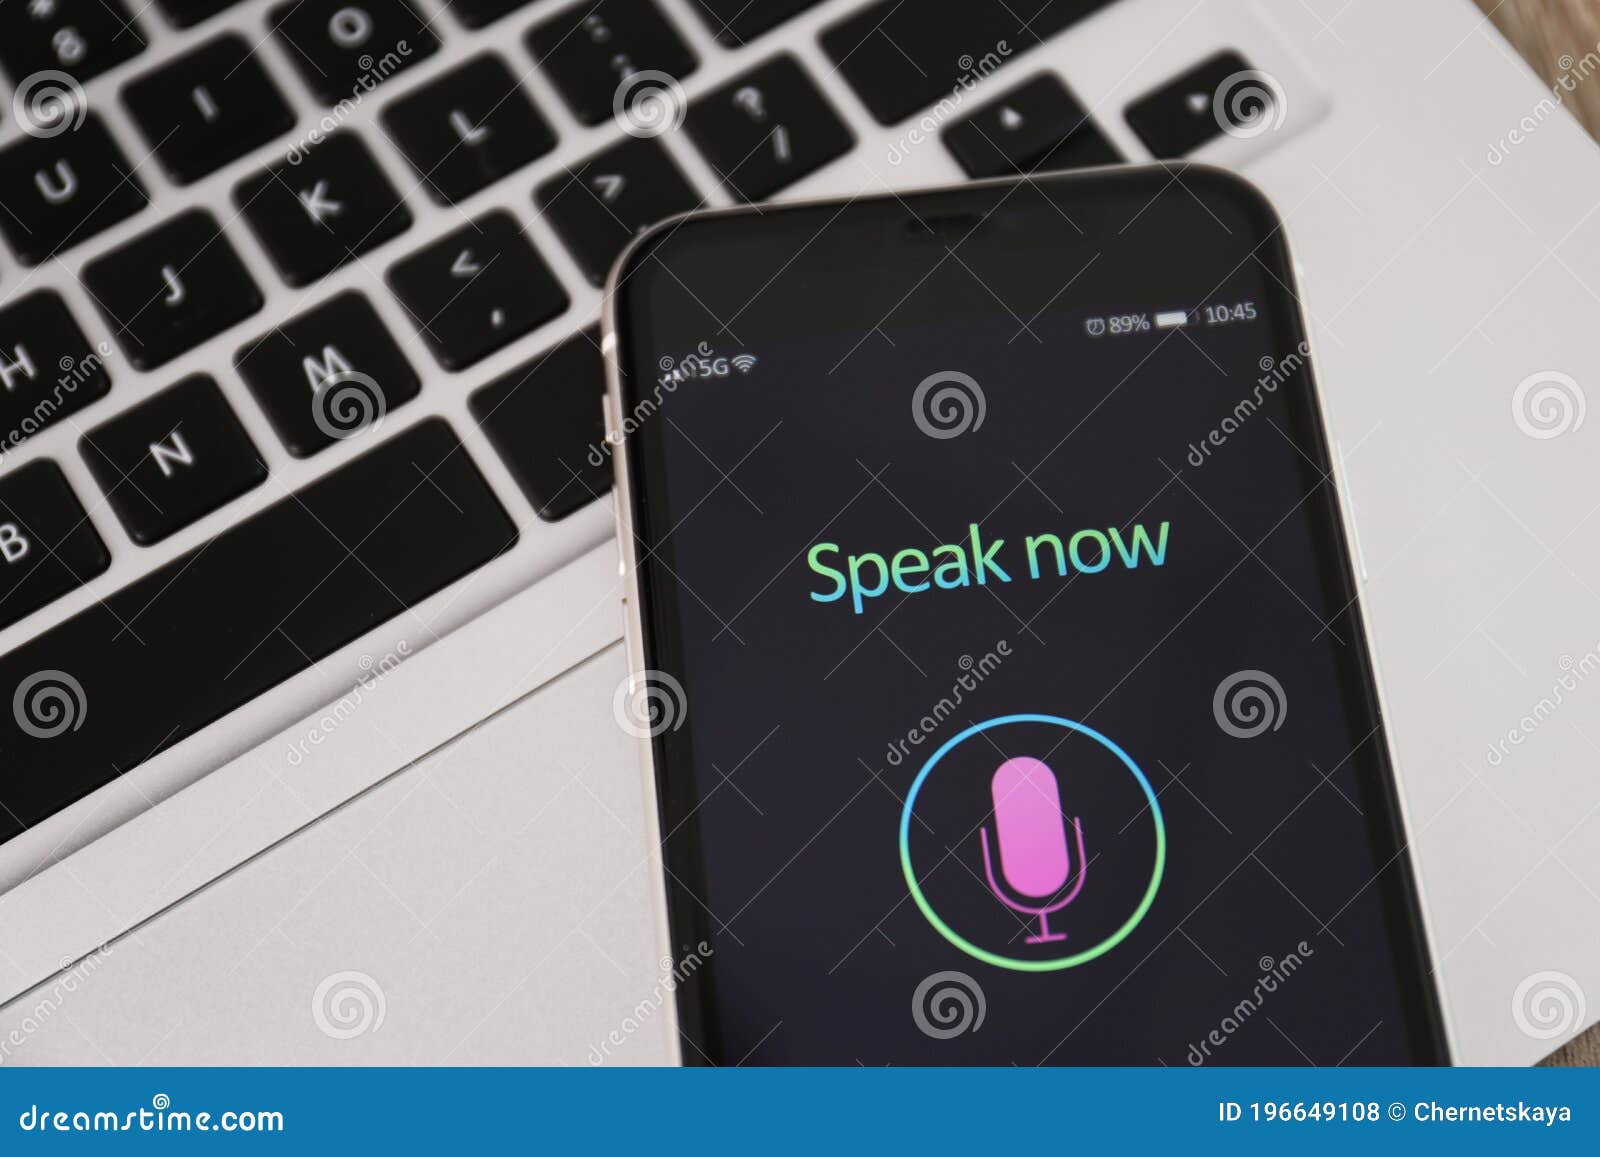 Smartphone With Activated Voice Search App On Laptop Closeup Stock Photo Image Of Device Search 196649108